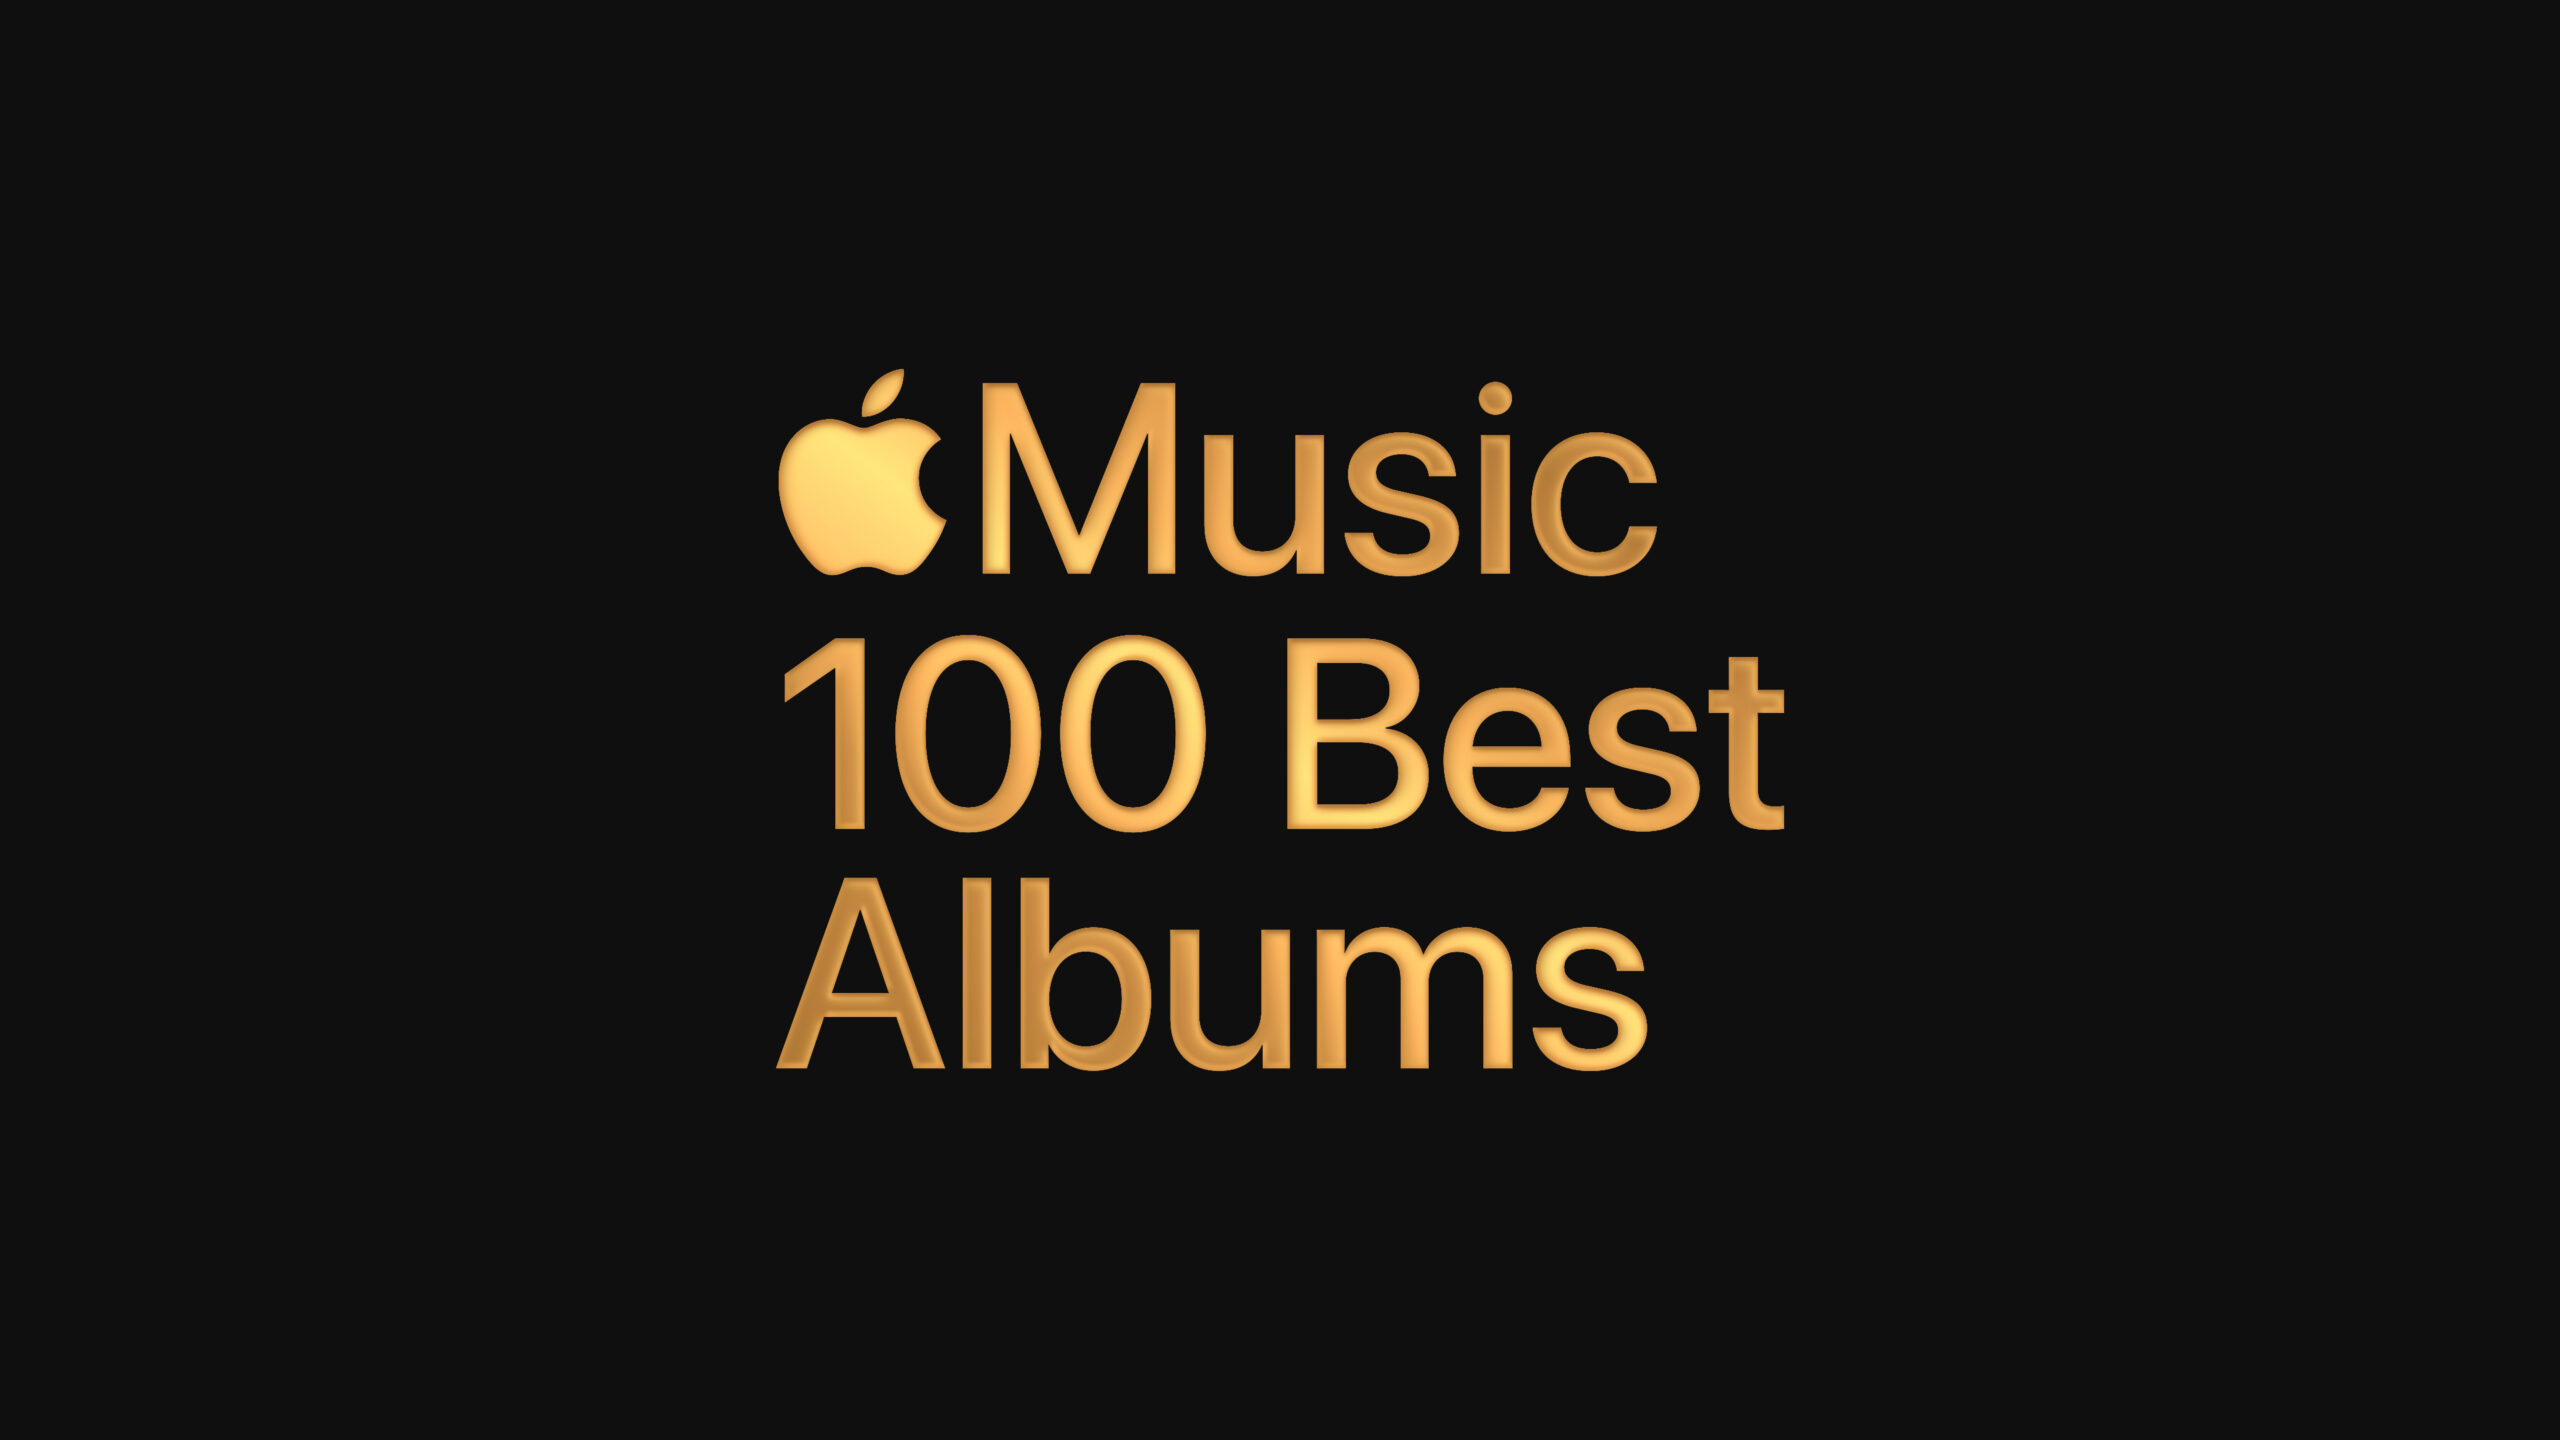 Usher, Solange and Travis Scott Albums Launch Apple Music’s Top 100 Best Albums of All Time list